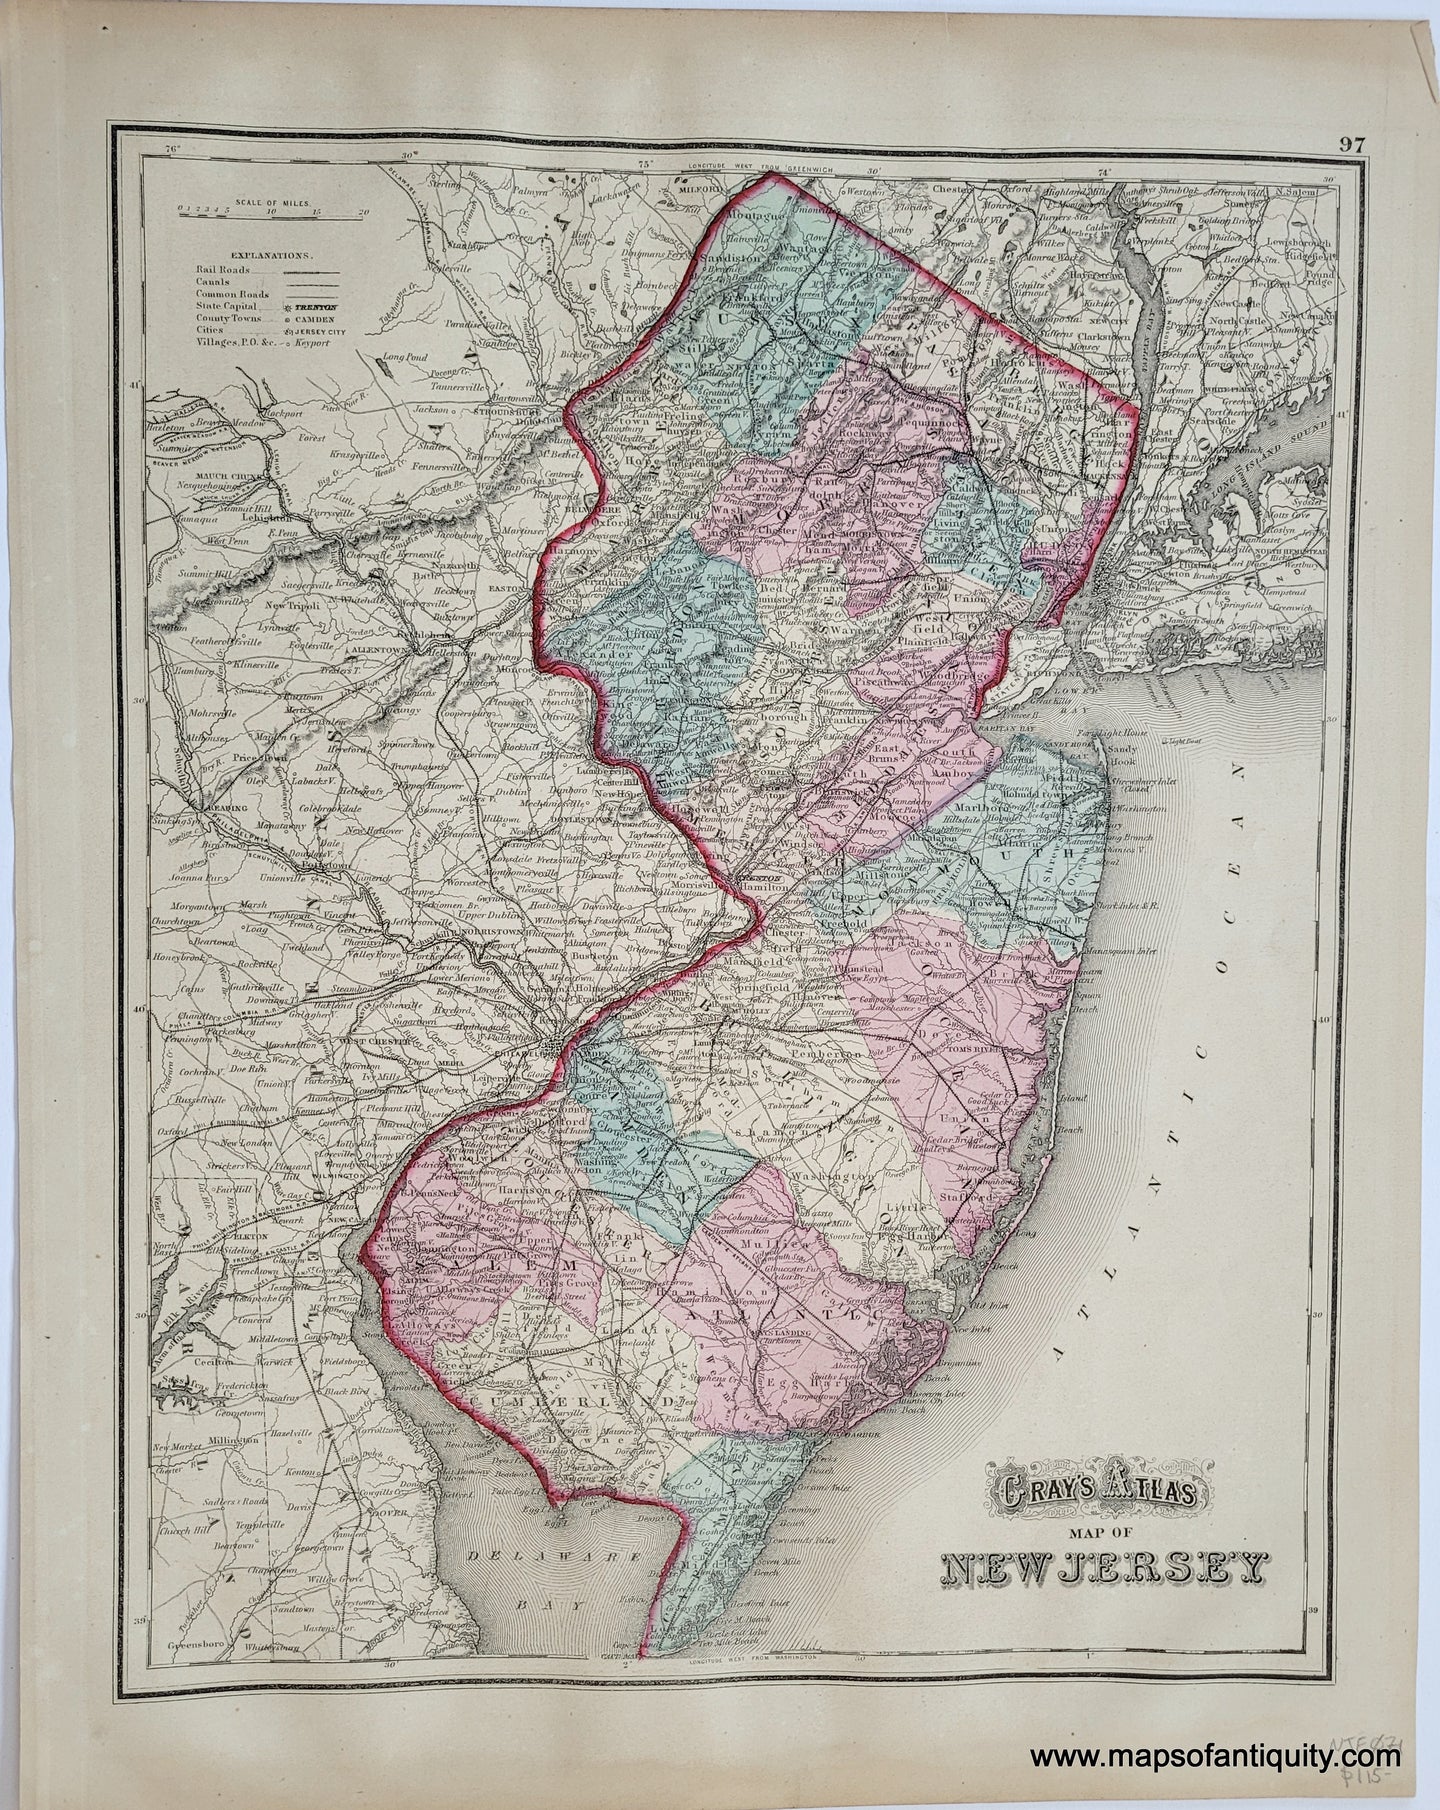 Antique-Hand-Colored-Map-Gray's-Atlas-Map-of-New-Jersey**********-New-Jersey--1874-Gray-Maps-Of-Antiquity